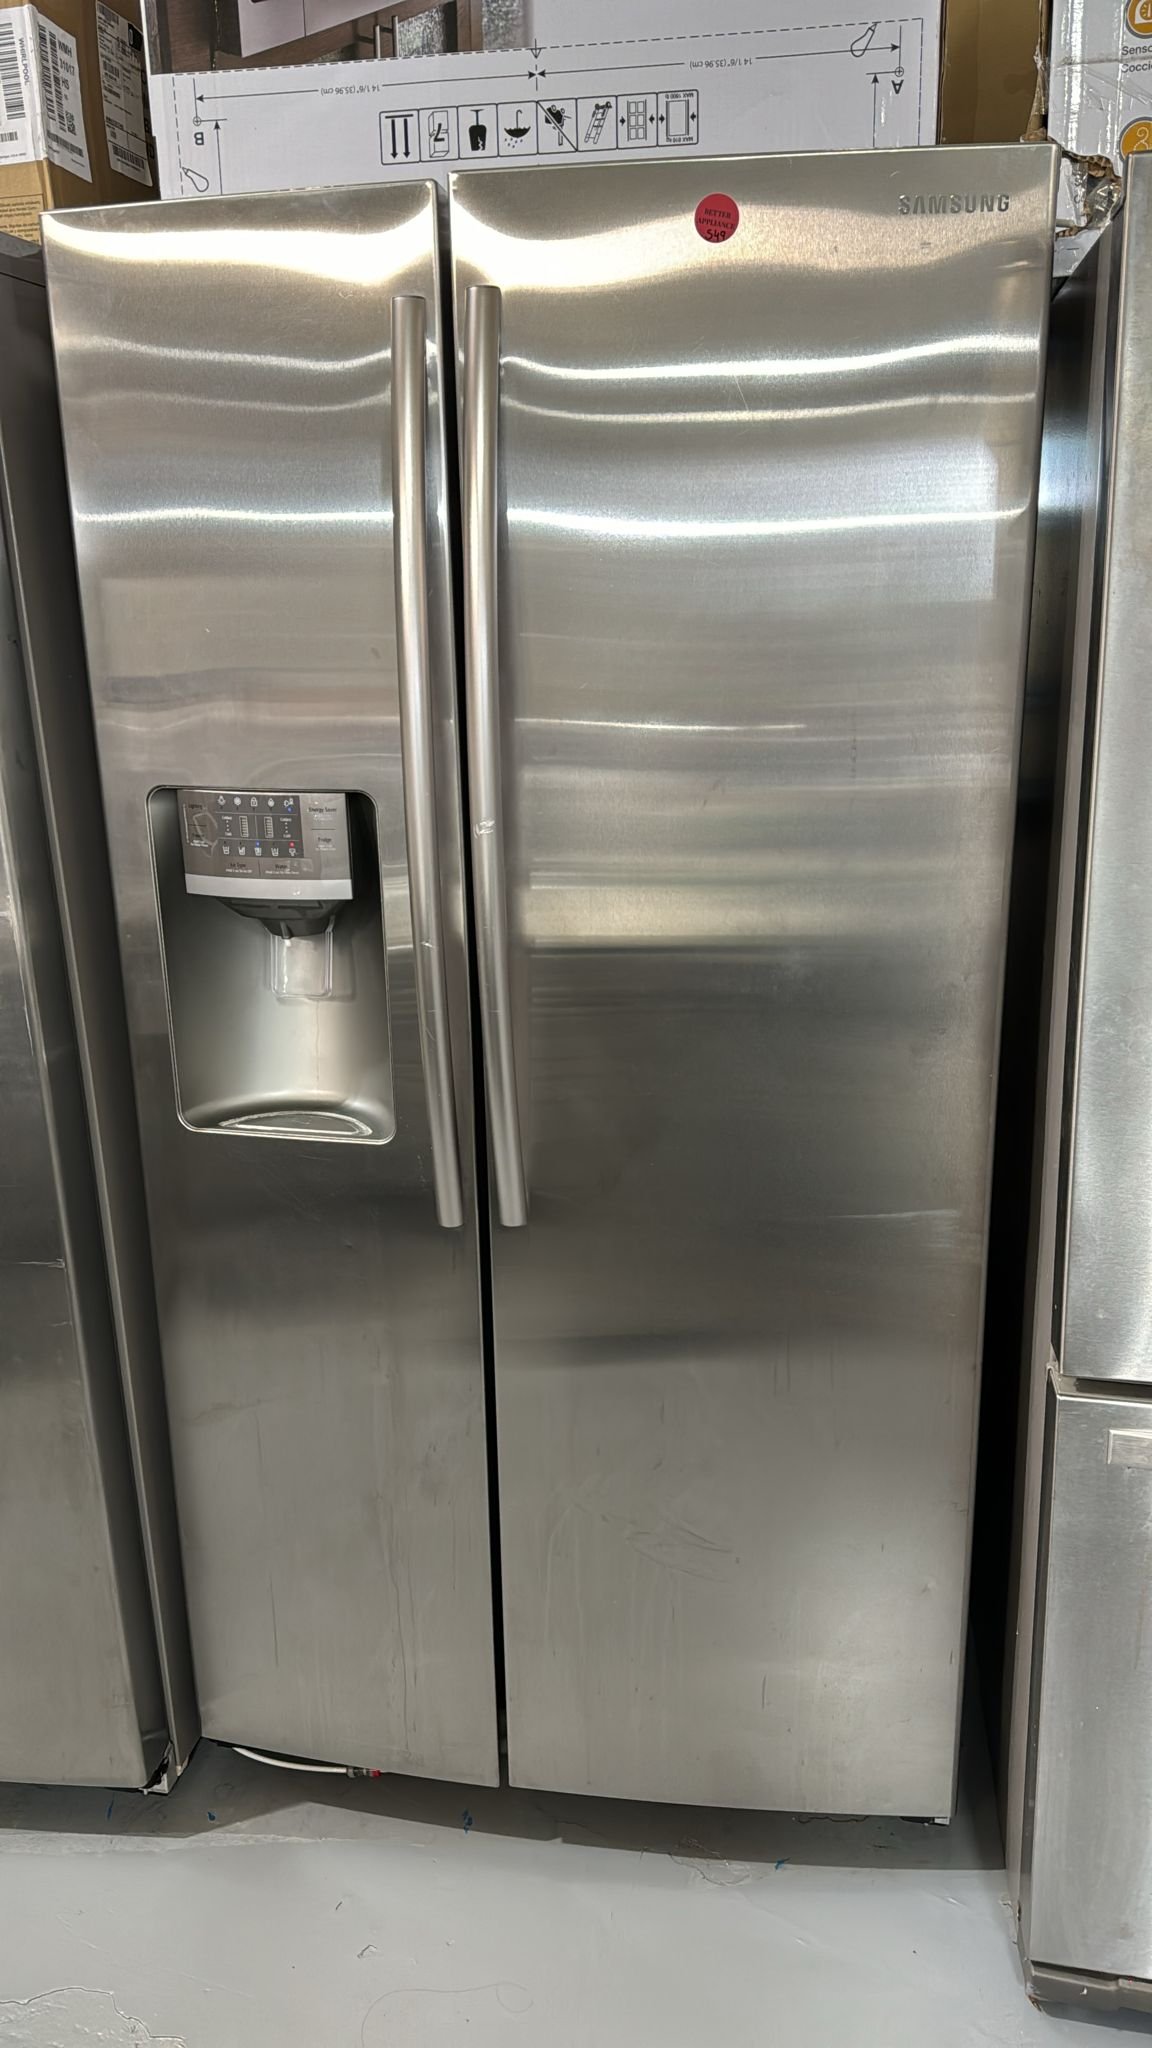 Samsung Used Side By Side Refrigerator – Stainless